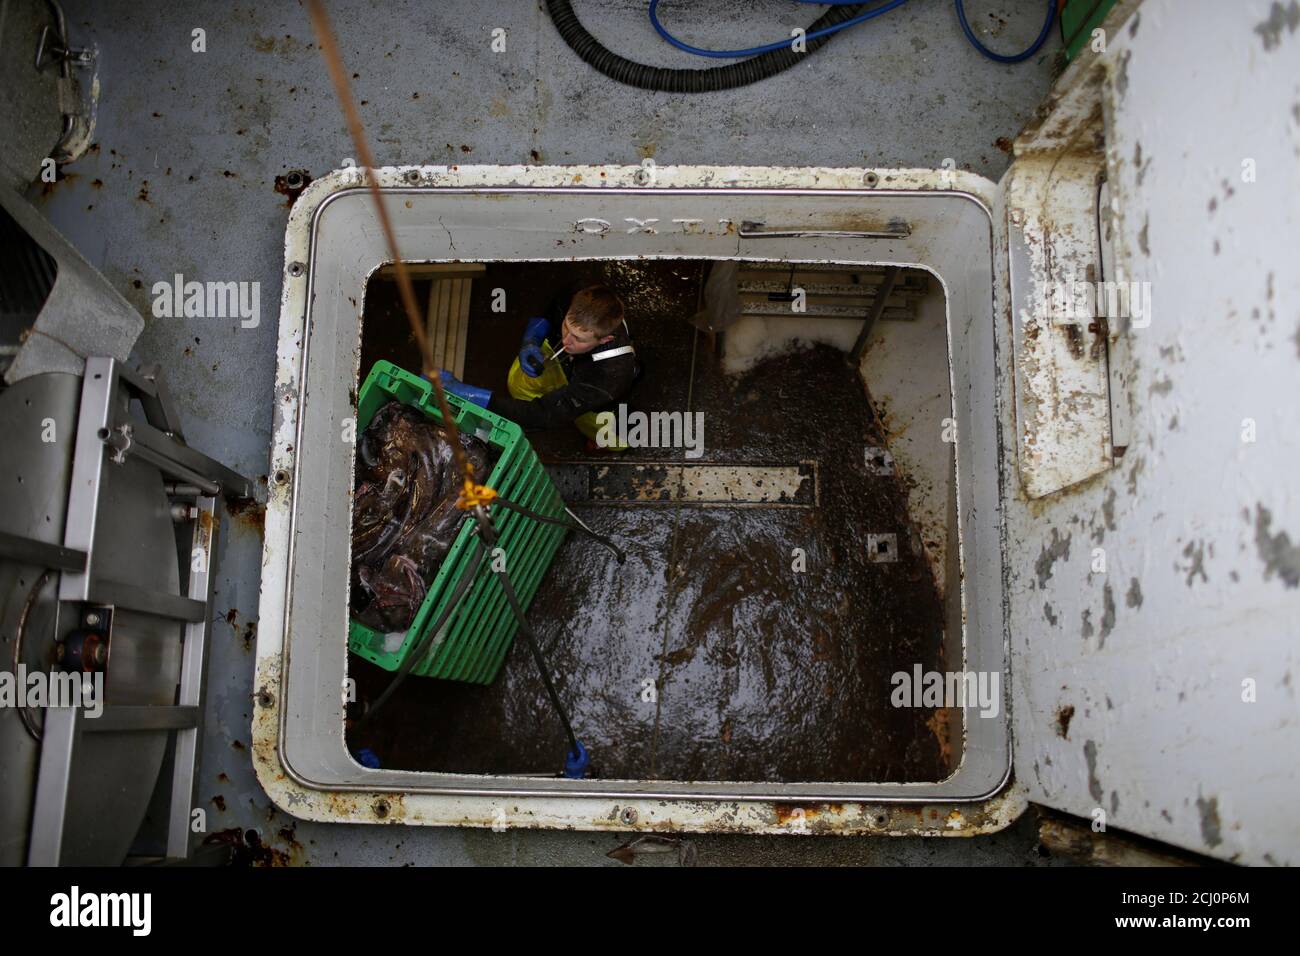 Mikkel Jakobsen, 22, prepares to unload caught fish after an expedition aboard the Pia Glanz while docked in the village of Thyboron in Jutland, Denmark, March 16, 2019. REUTERS/Andrew Kelly Stock Photo